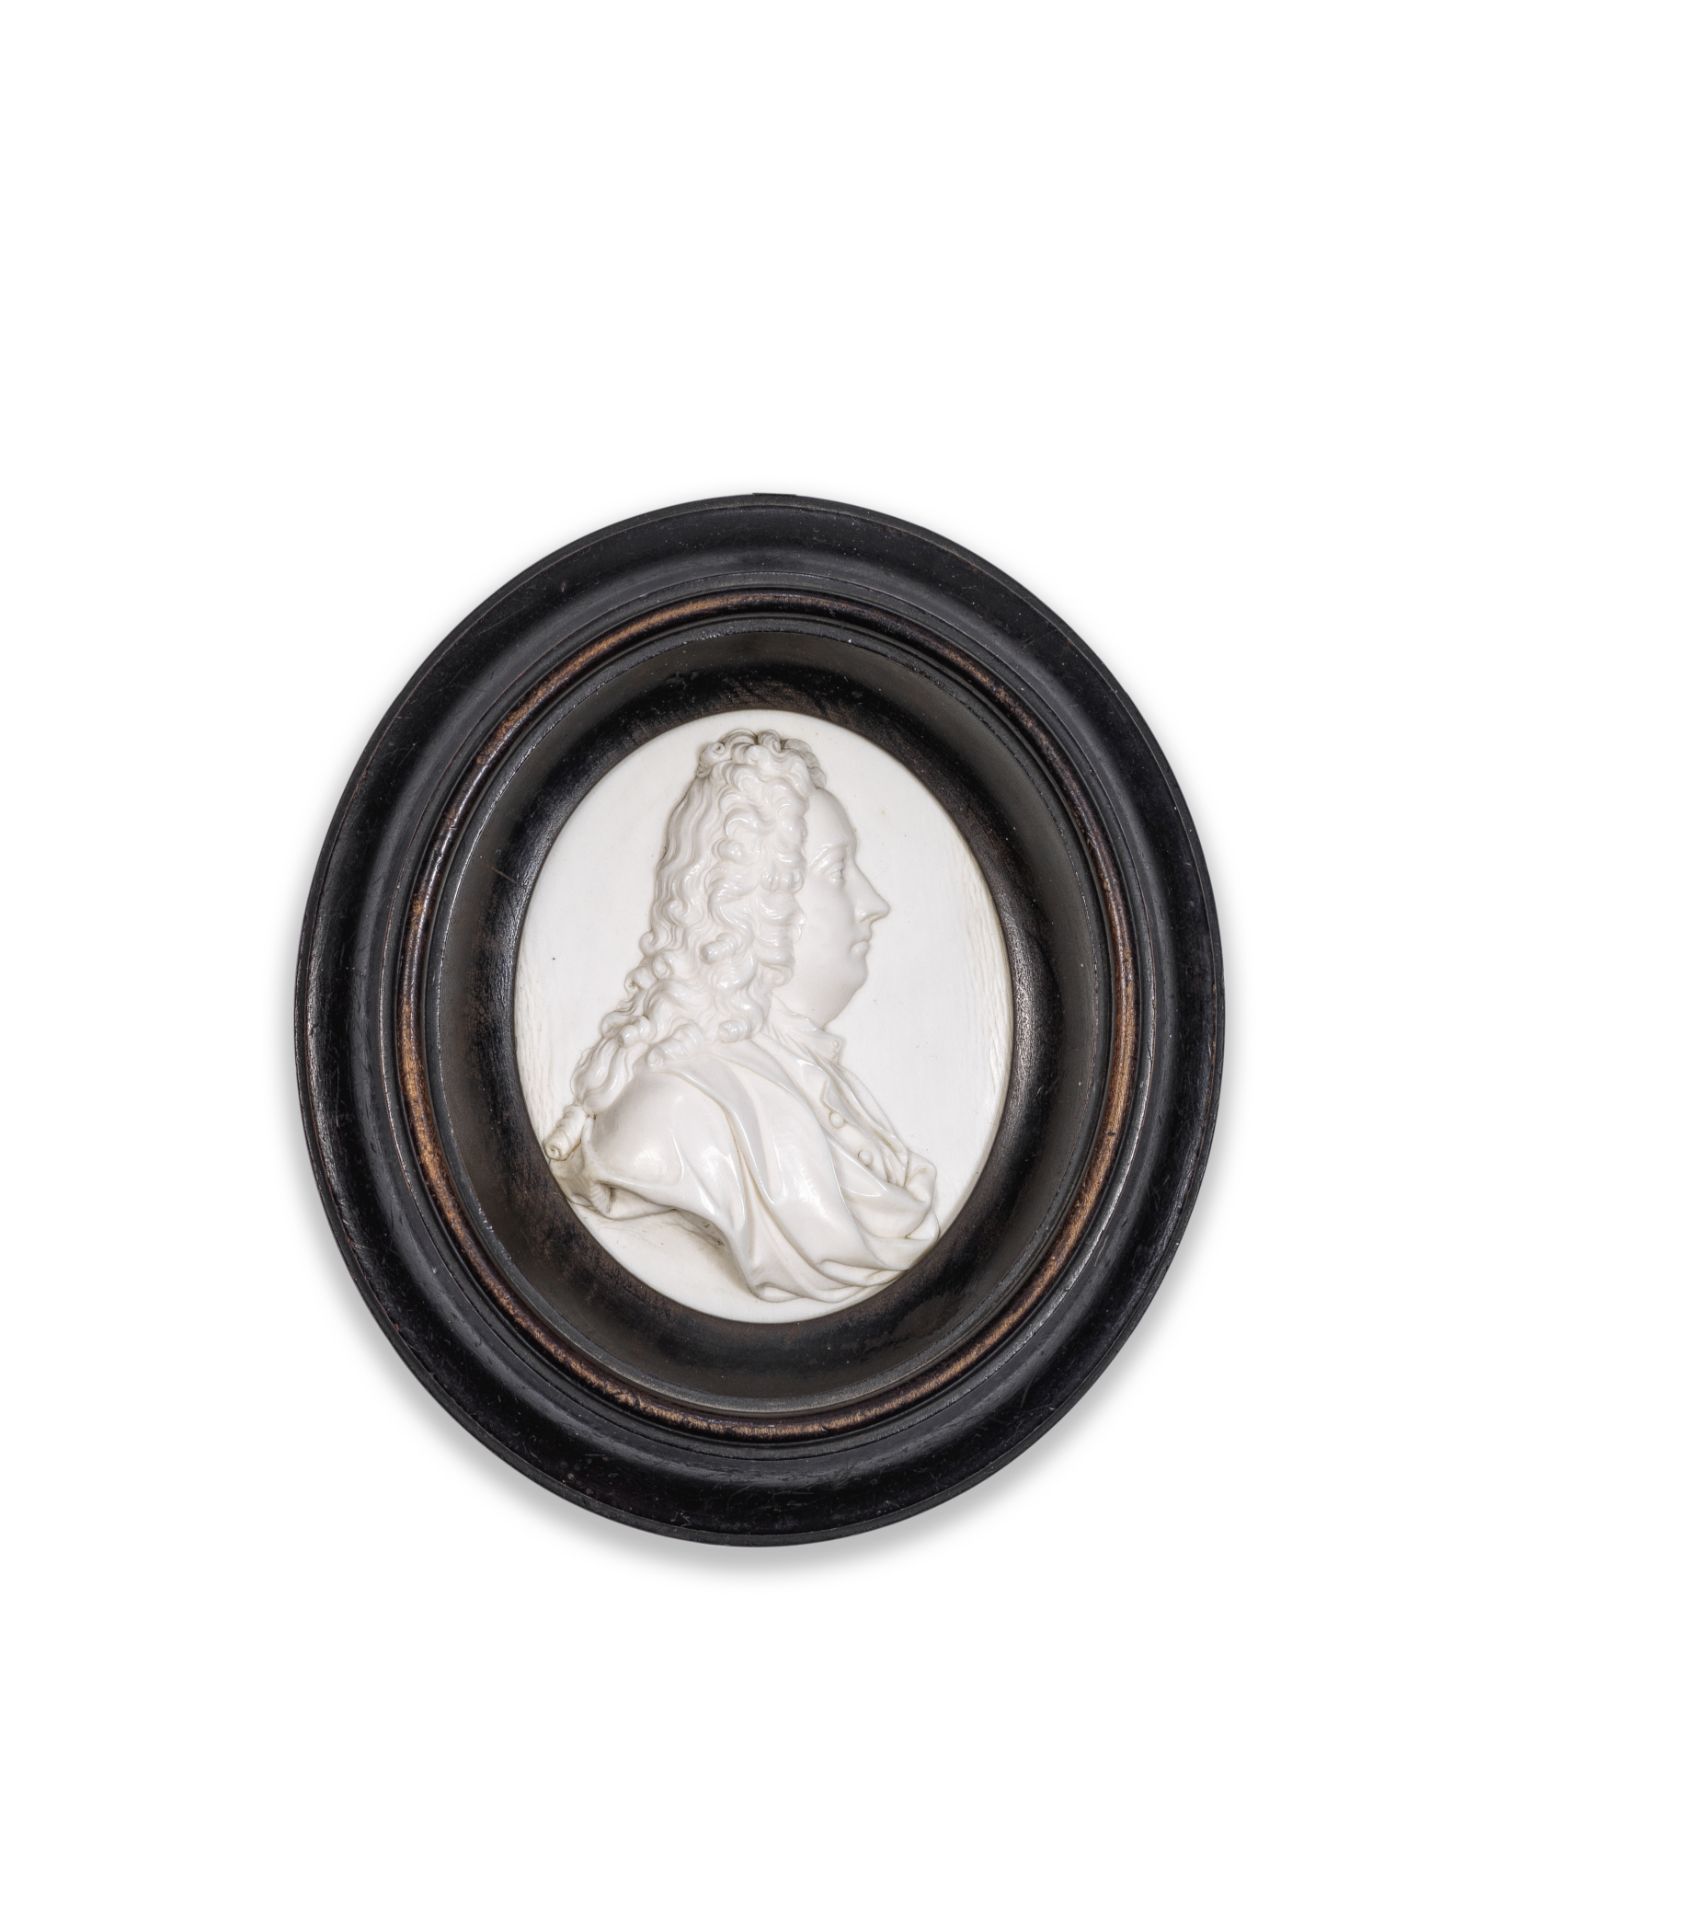 David Le Marchand (Anglo-French, 1674-1726): An early 18th century relief carved ivory oval portr...